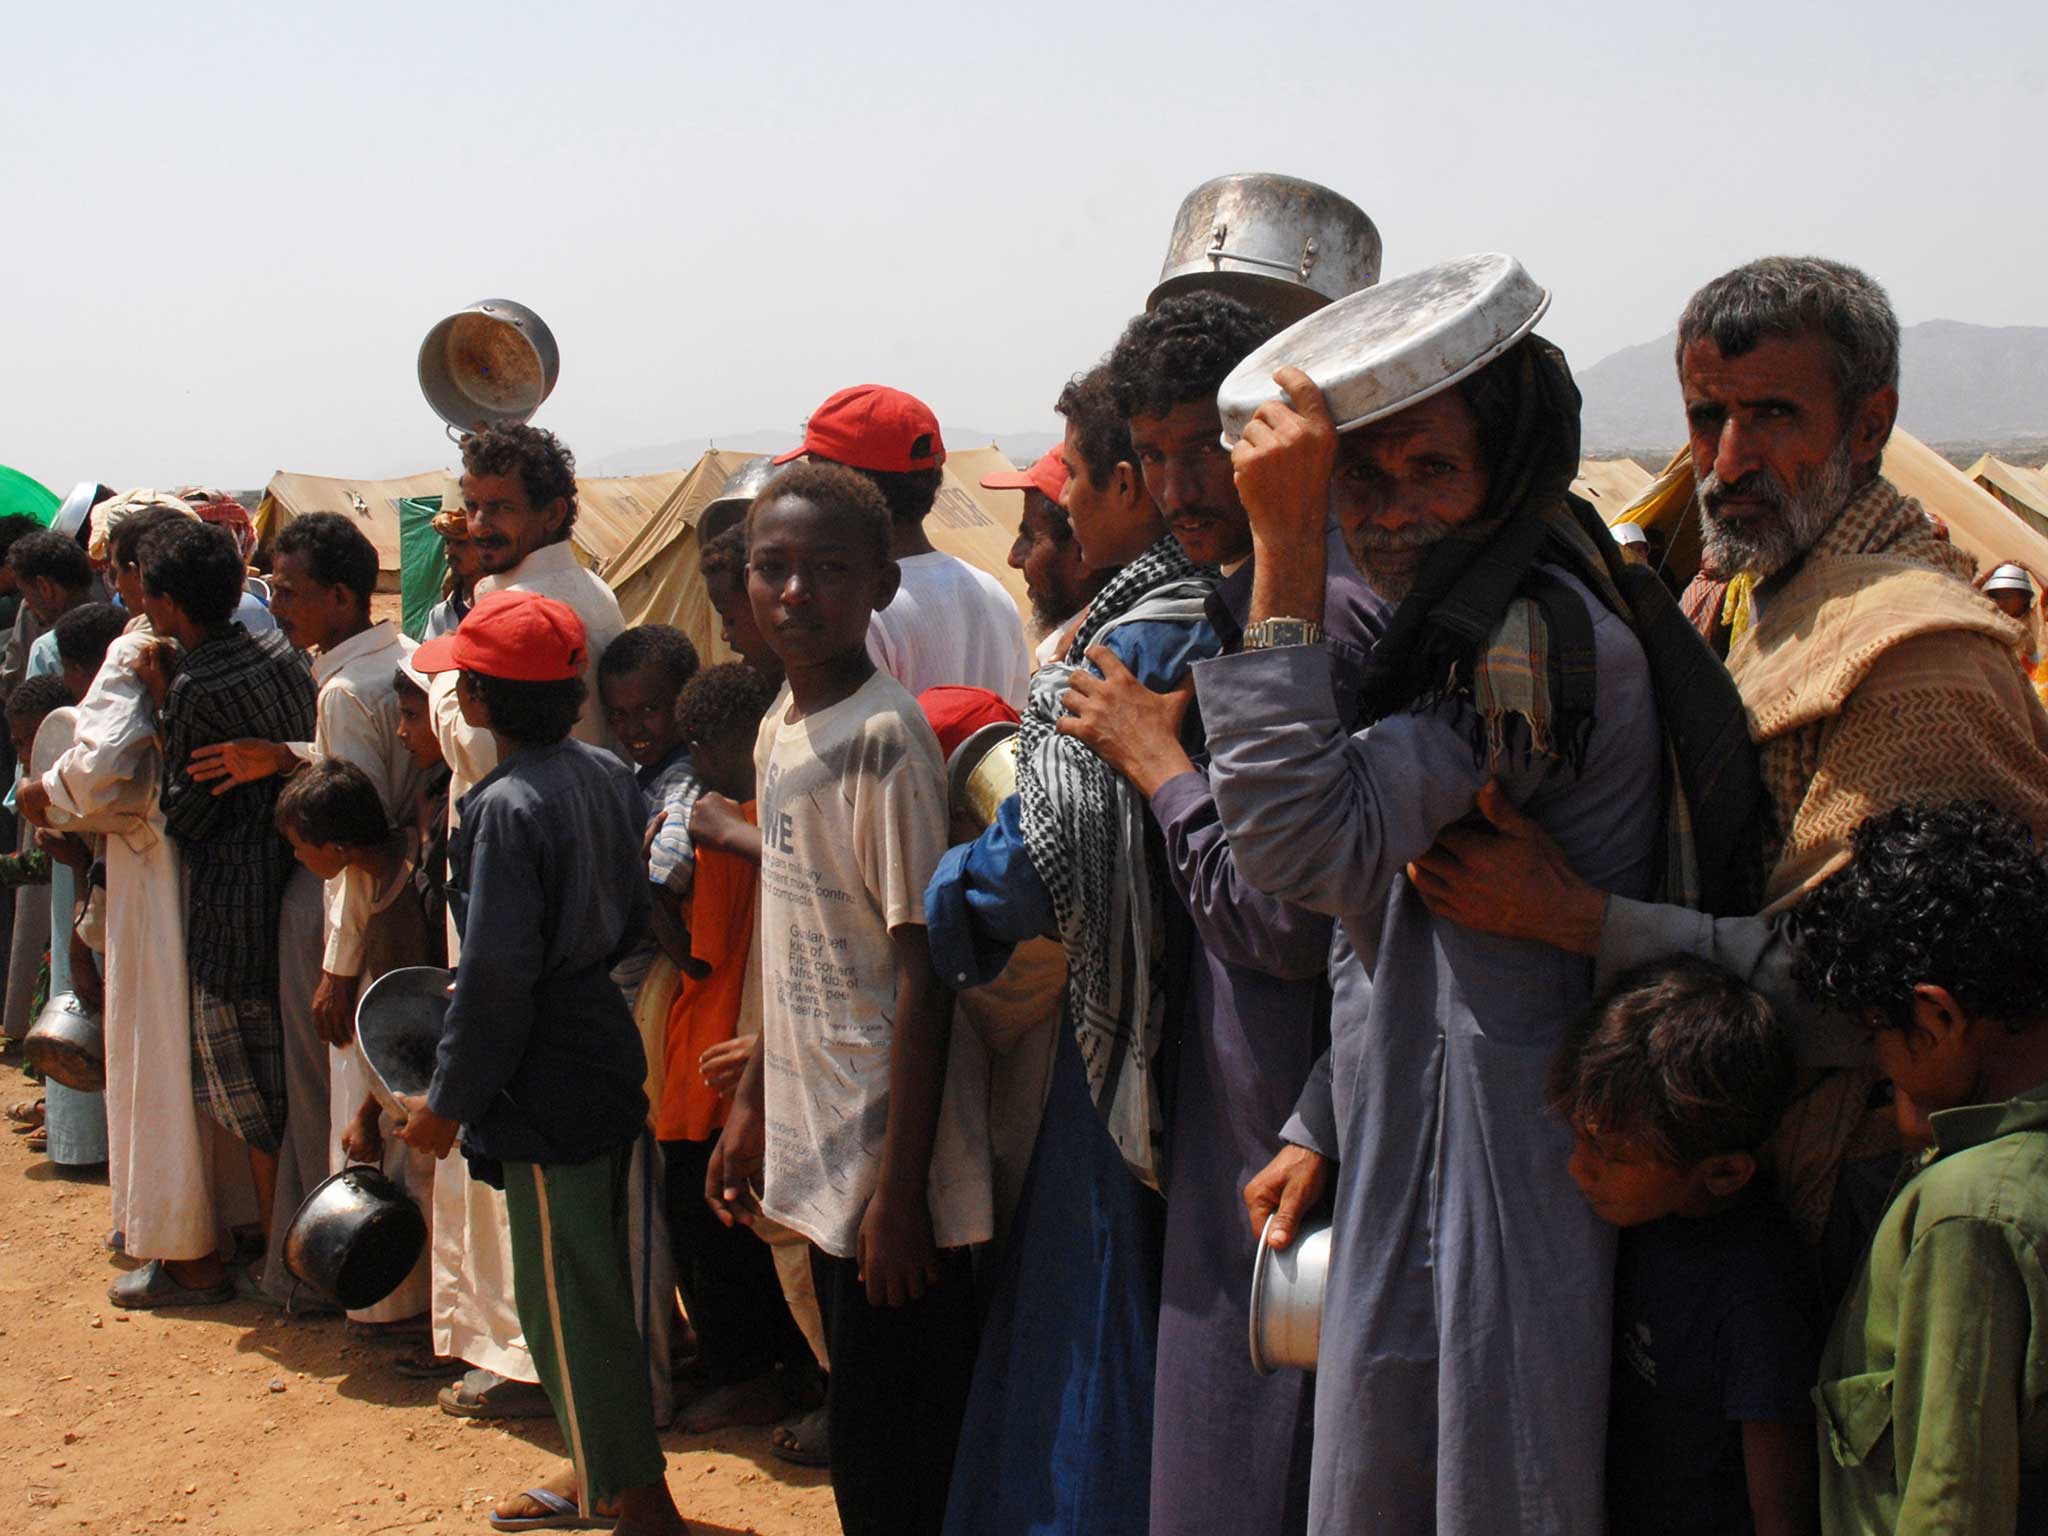 Yemeni refugees queue to get food aid at the Marzaq internally displaced people's camp in Harad in the northwestern province of Hajjah 2009